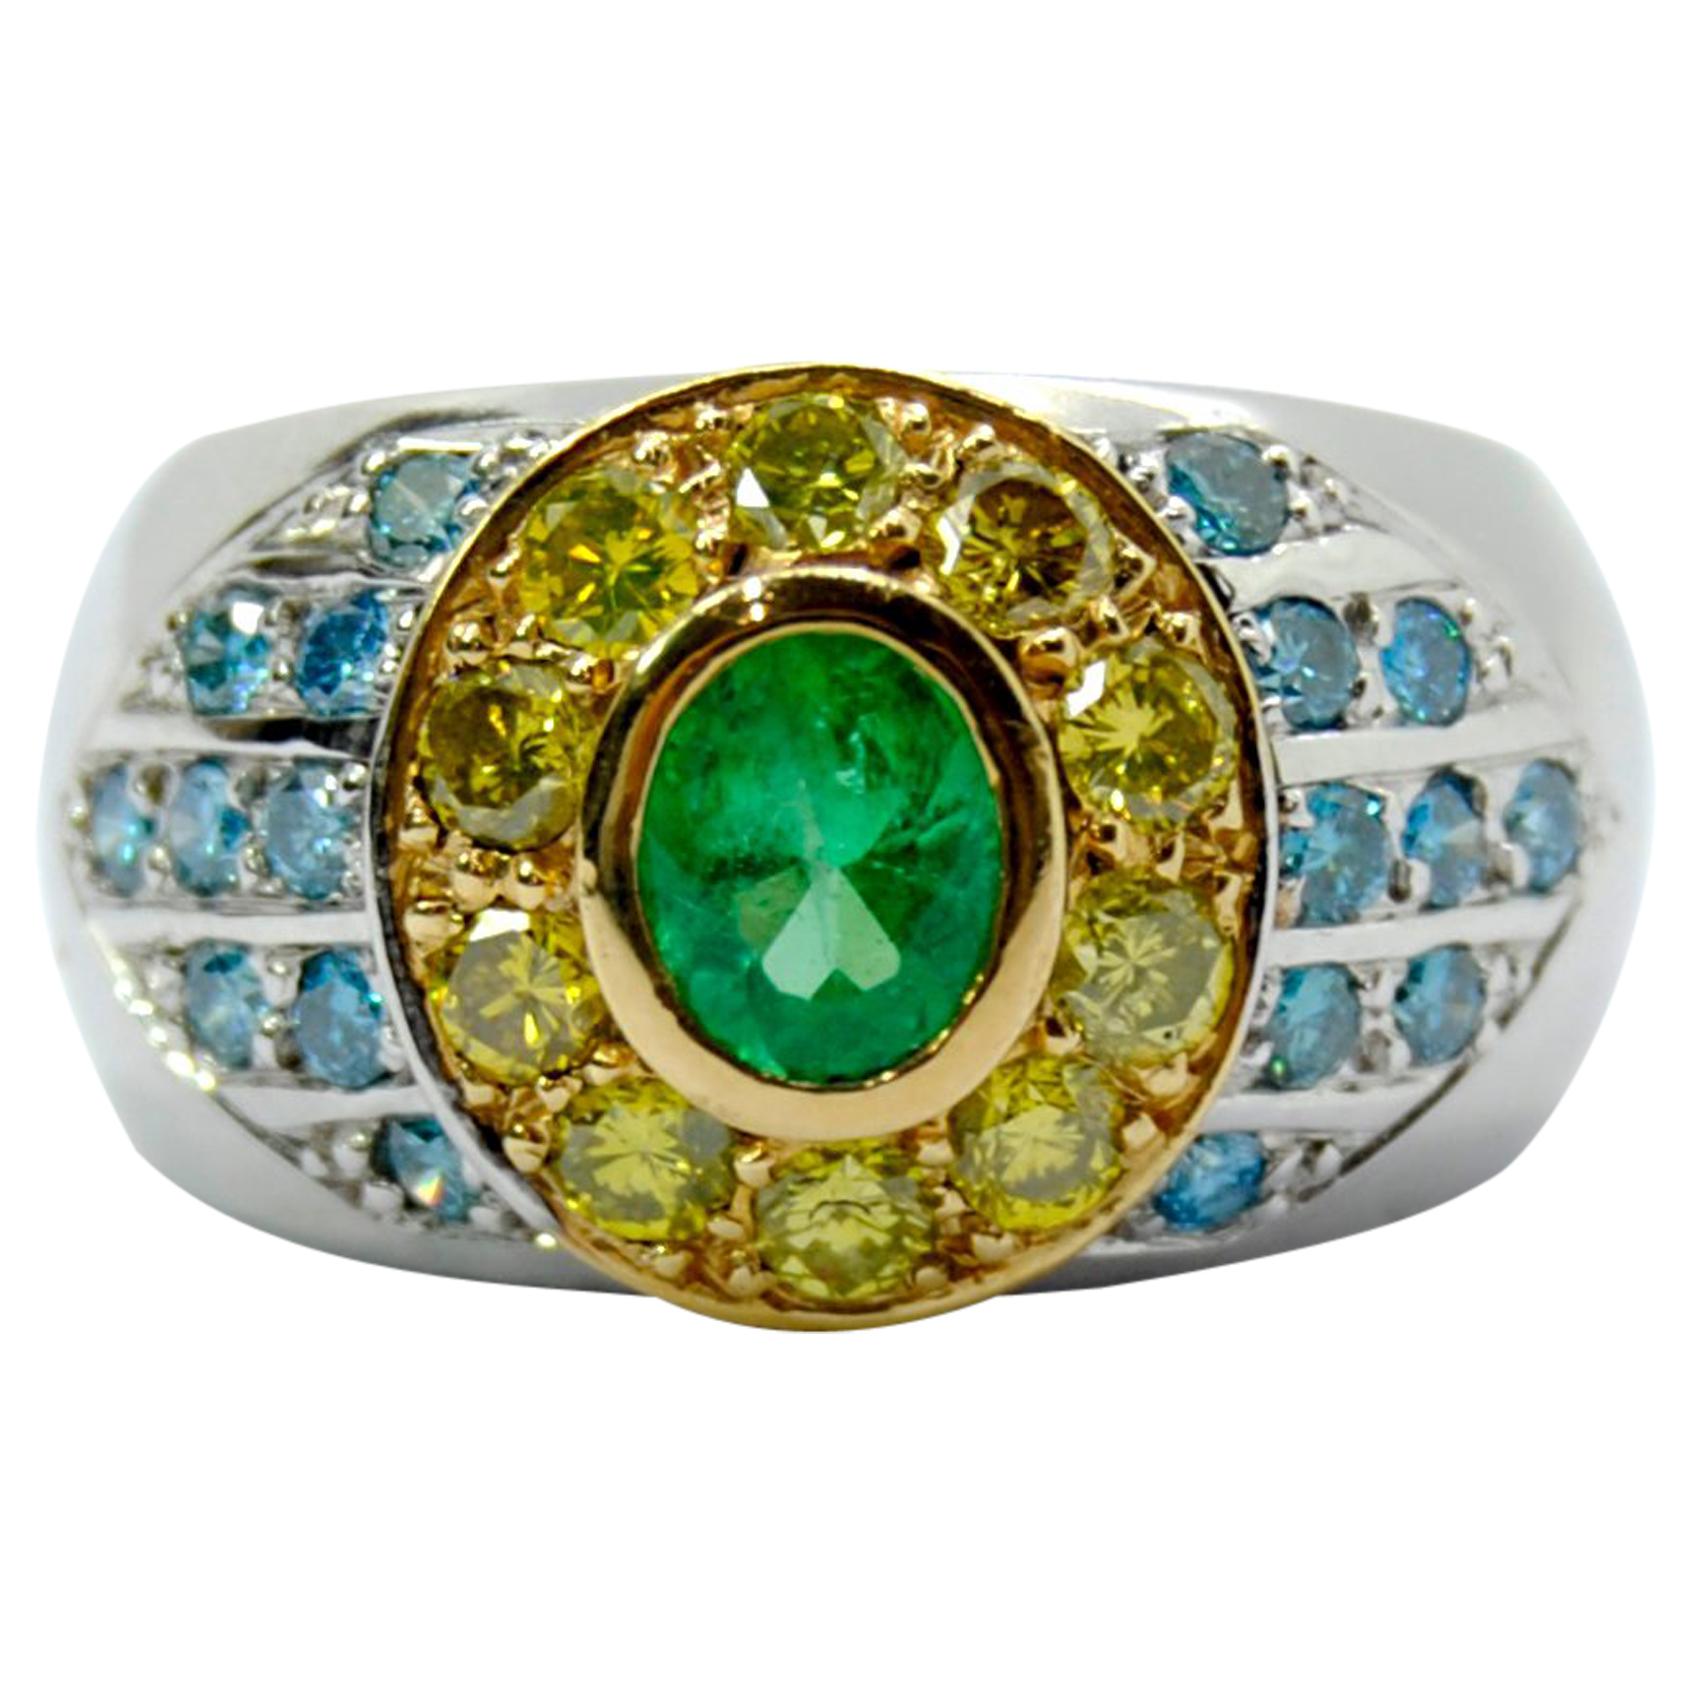 Blue and Yellow Diamonds Pairing with a Tsavorite in an 18 Karat White Gold Ring